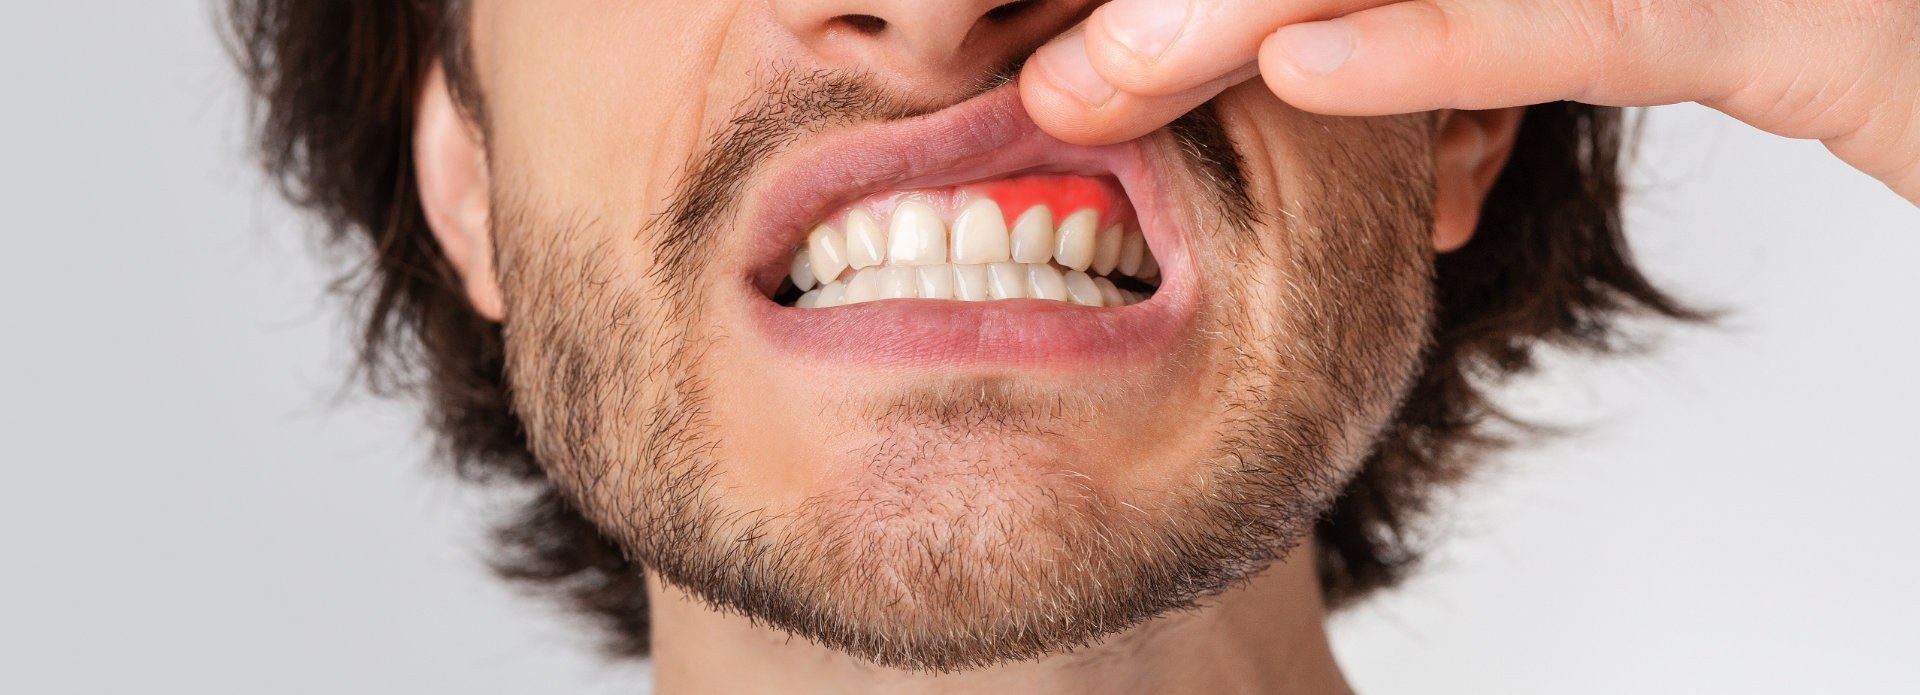 A man showing his red swollen gum.